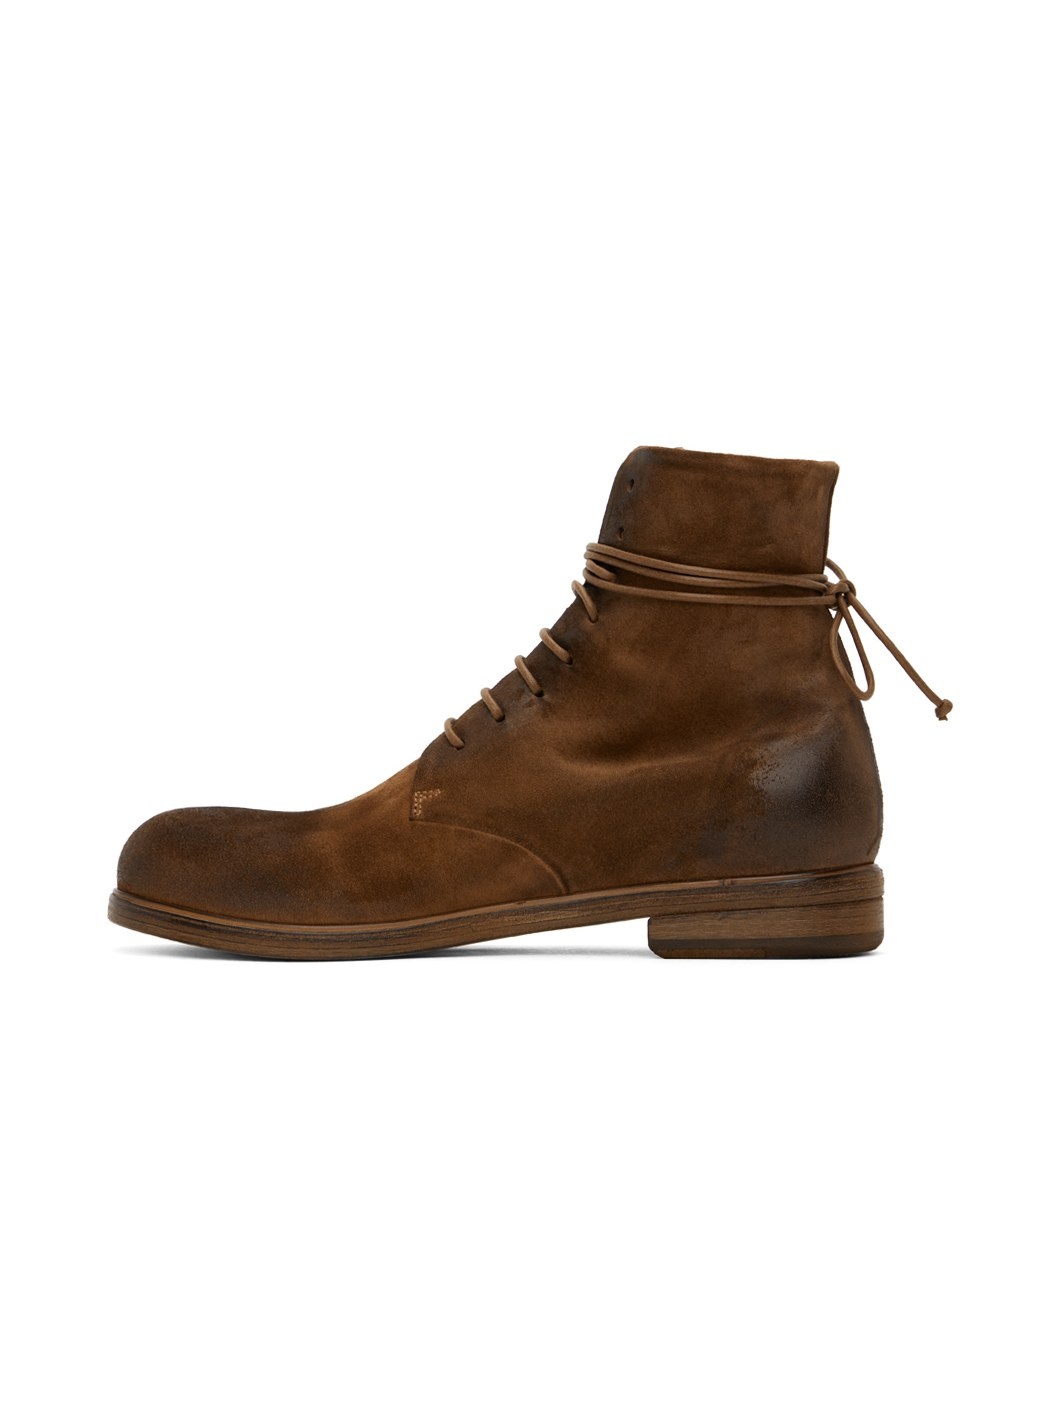 Brown Zucca Media Boots - 3